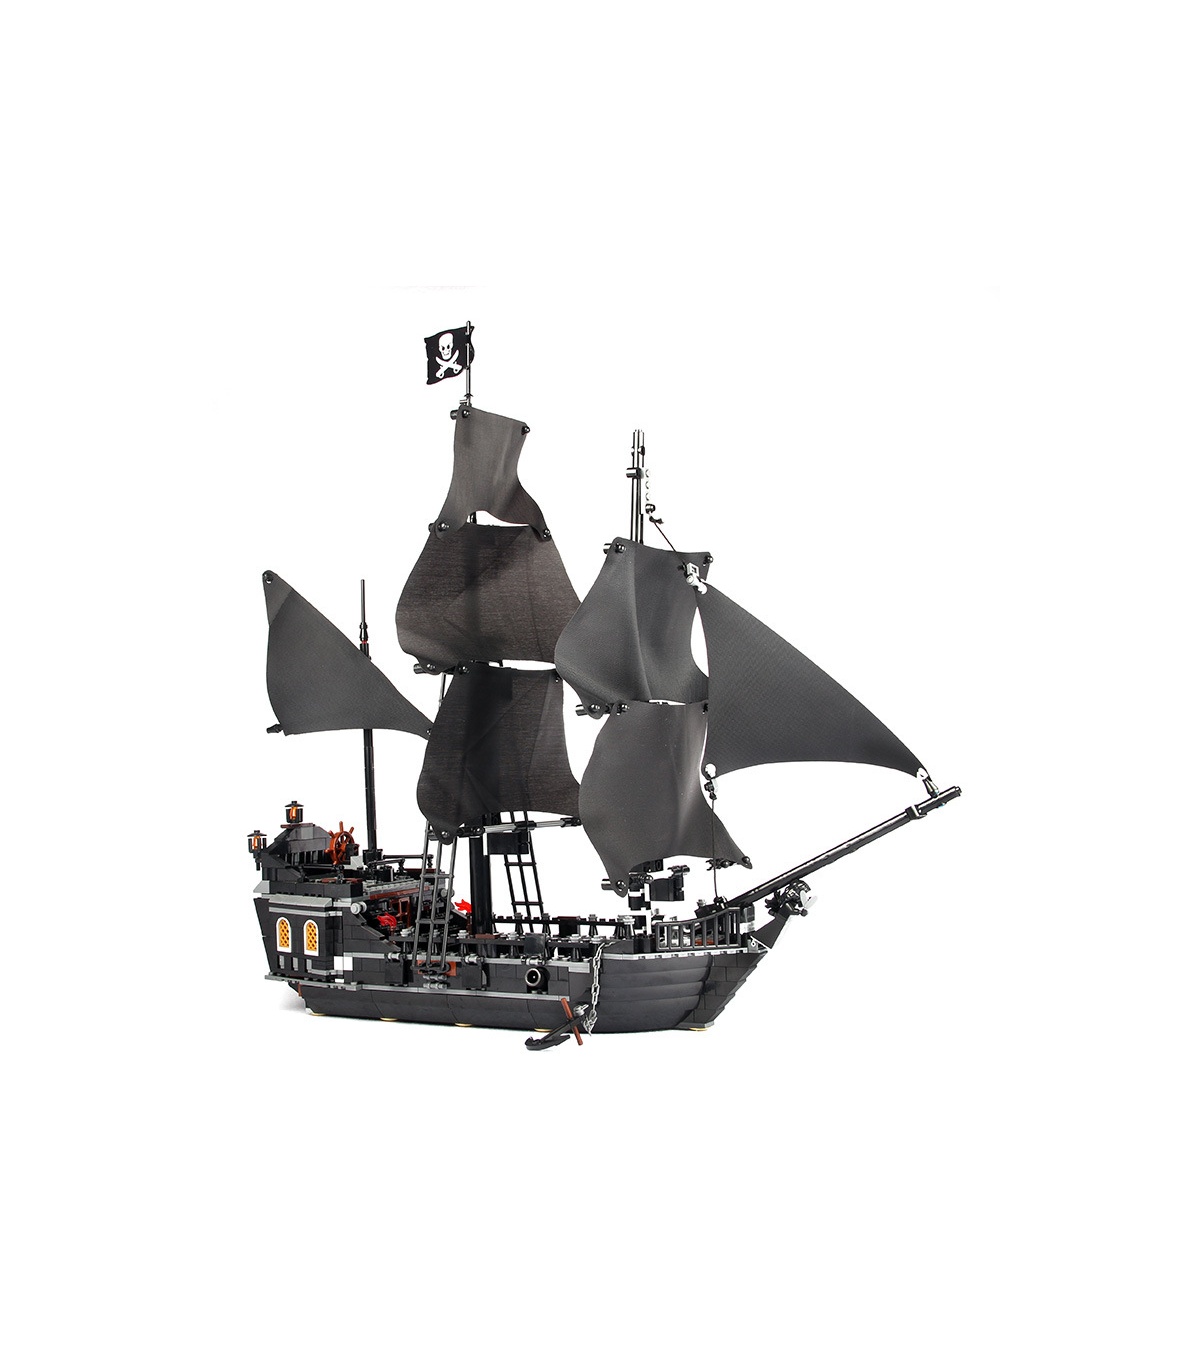 Custom Pirates of the Caribbean The Black Pearl Building Bricks Toy Set 804 Pieces